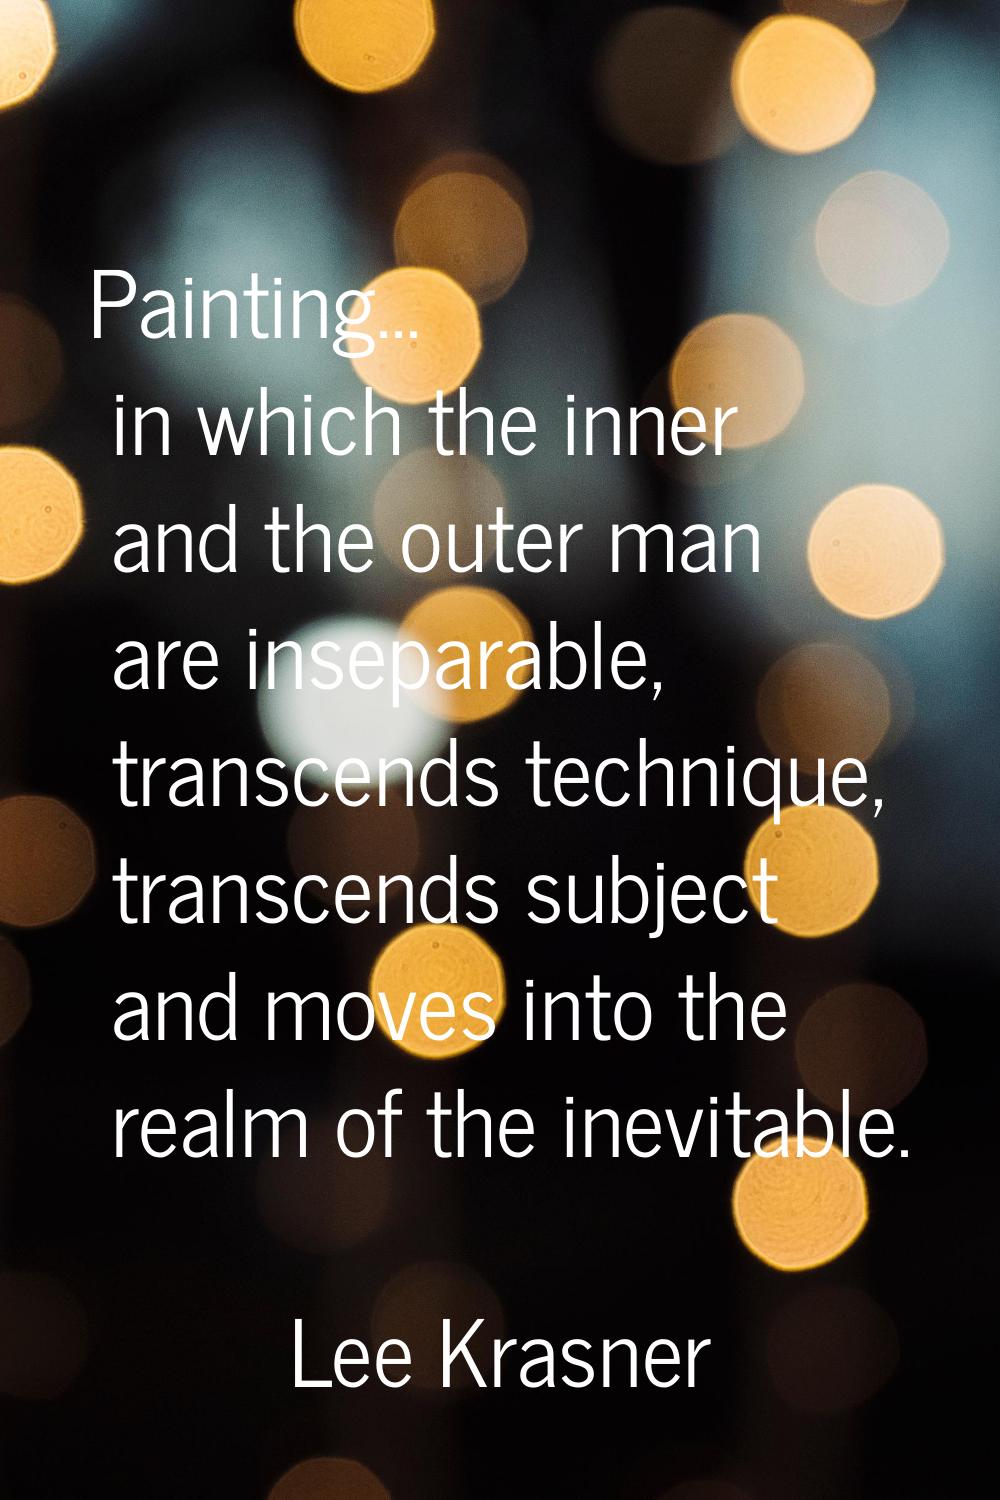 Painting... in which the inner and the outer man are inseparable, transcends technique, transcends 